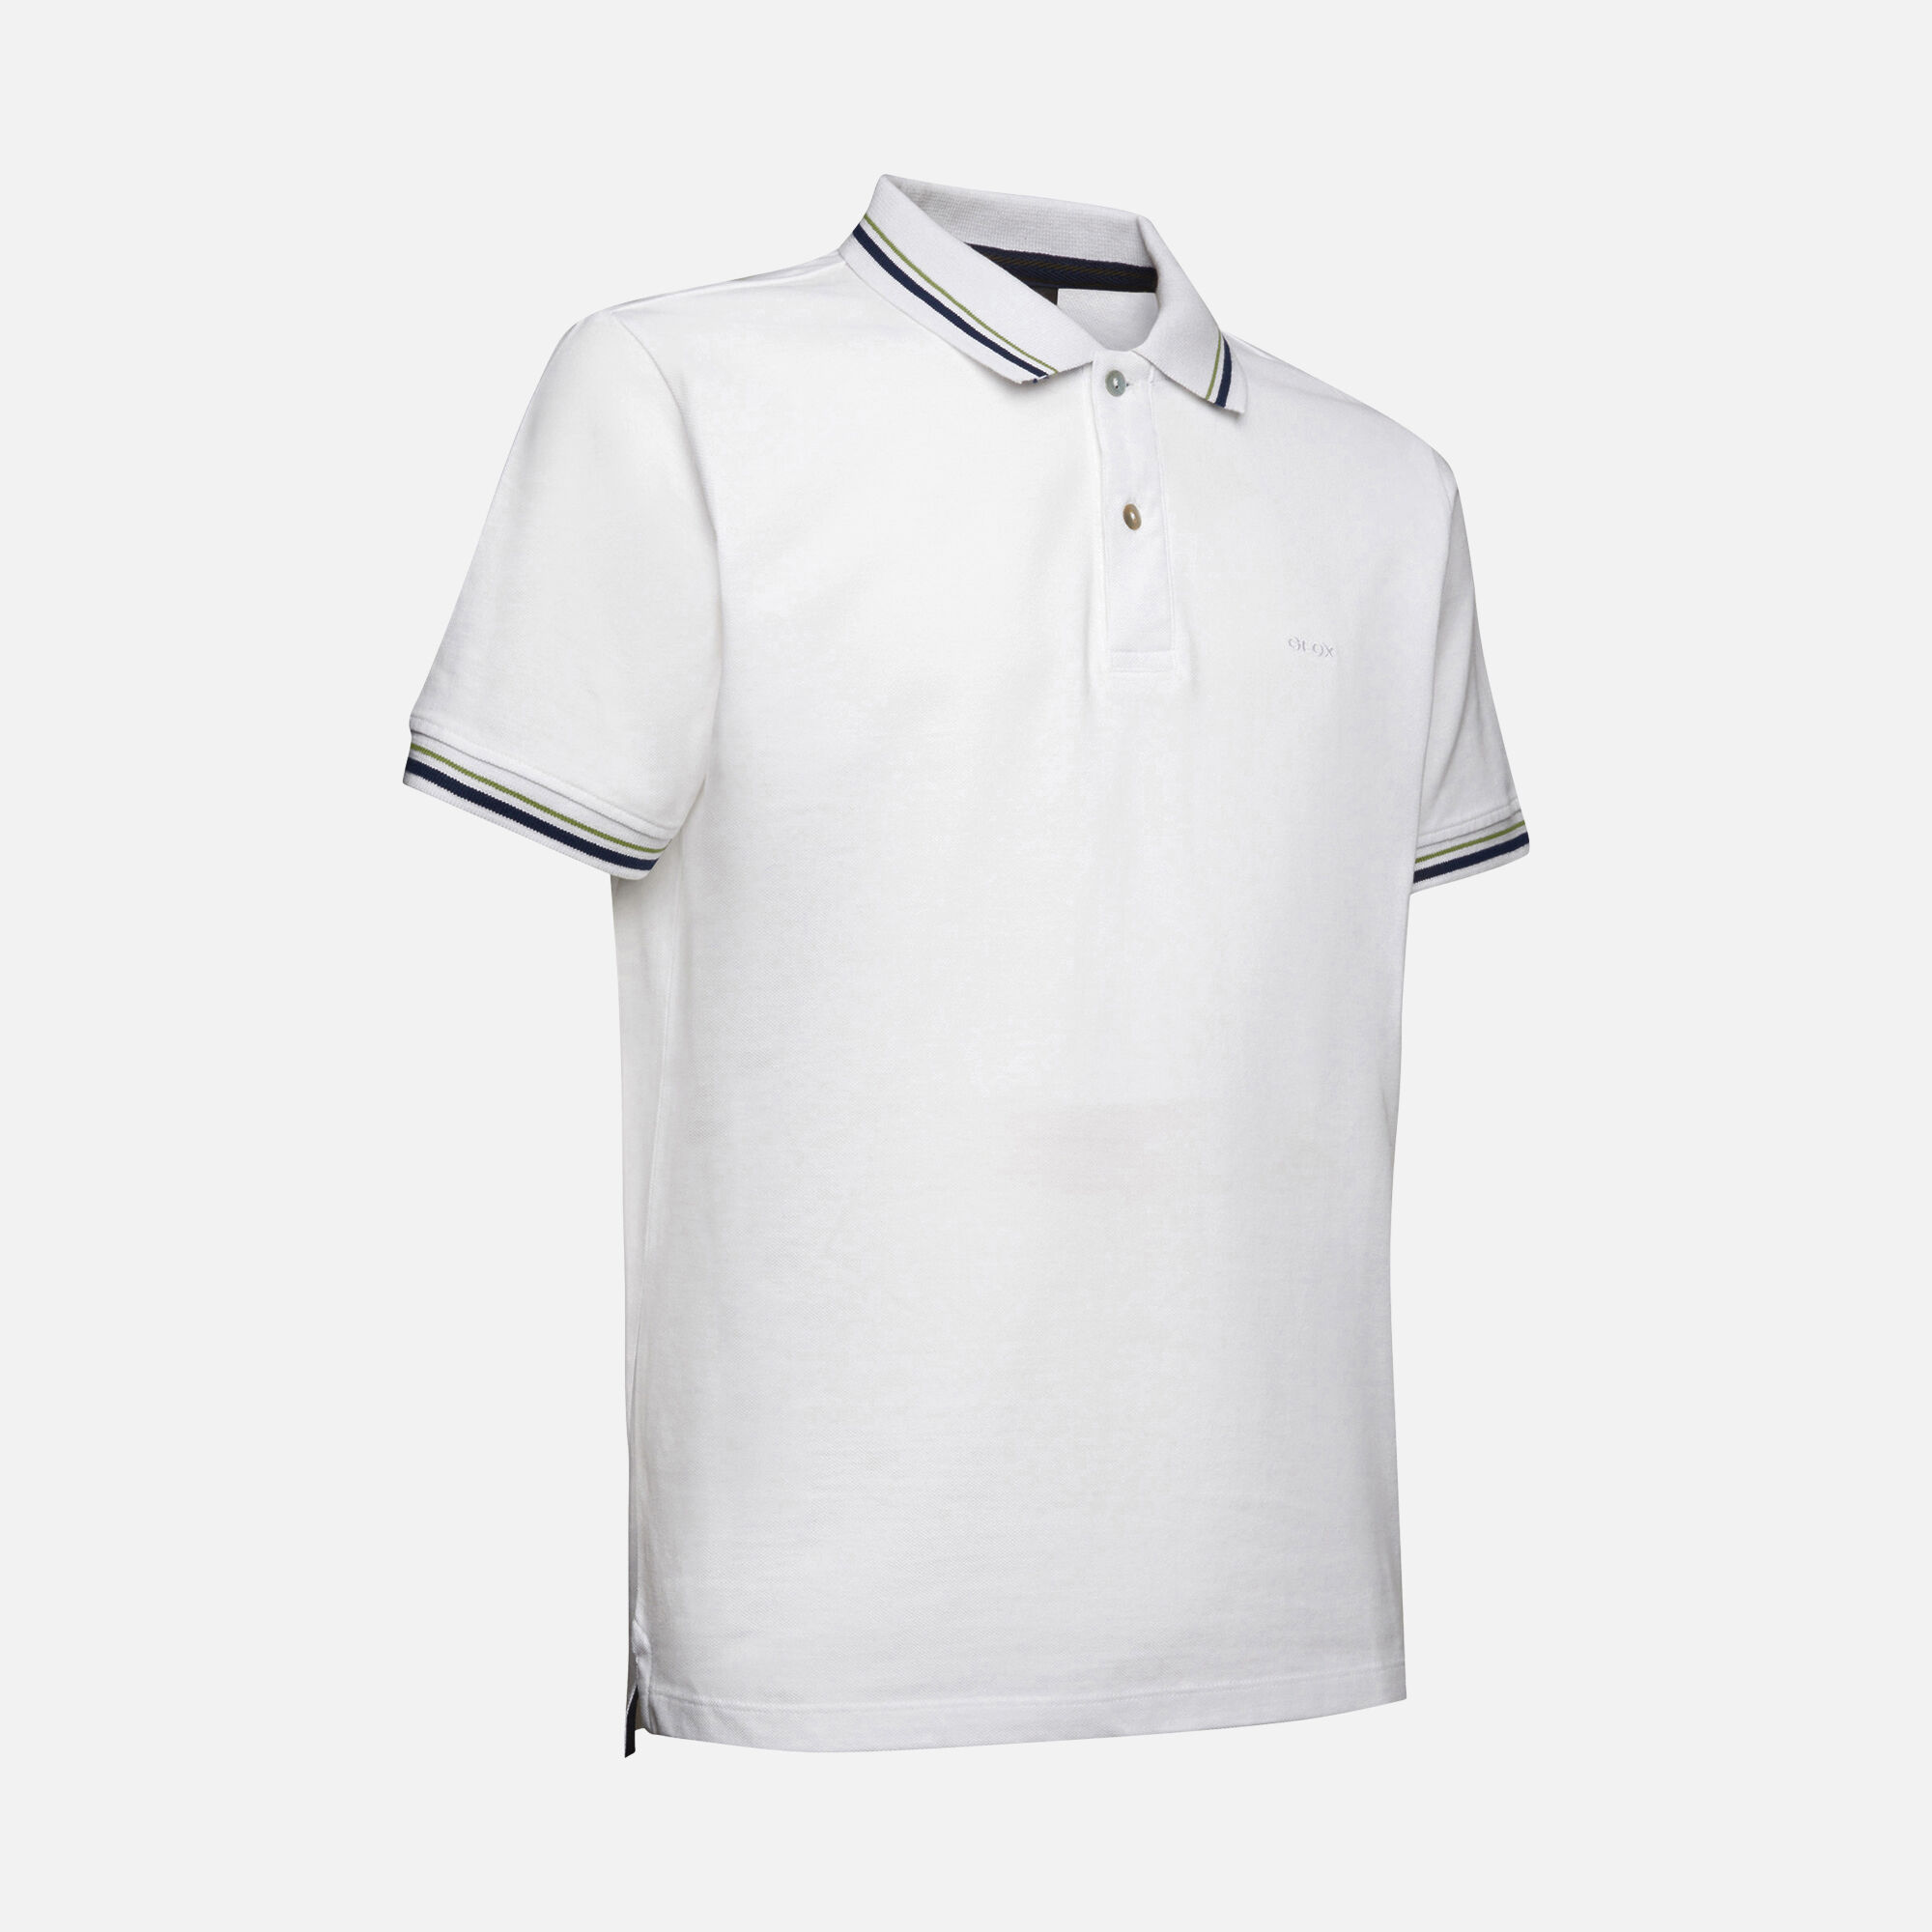 Geox SUSTAINABLE Man: Optical White Polo | Geox Spring/Summer